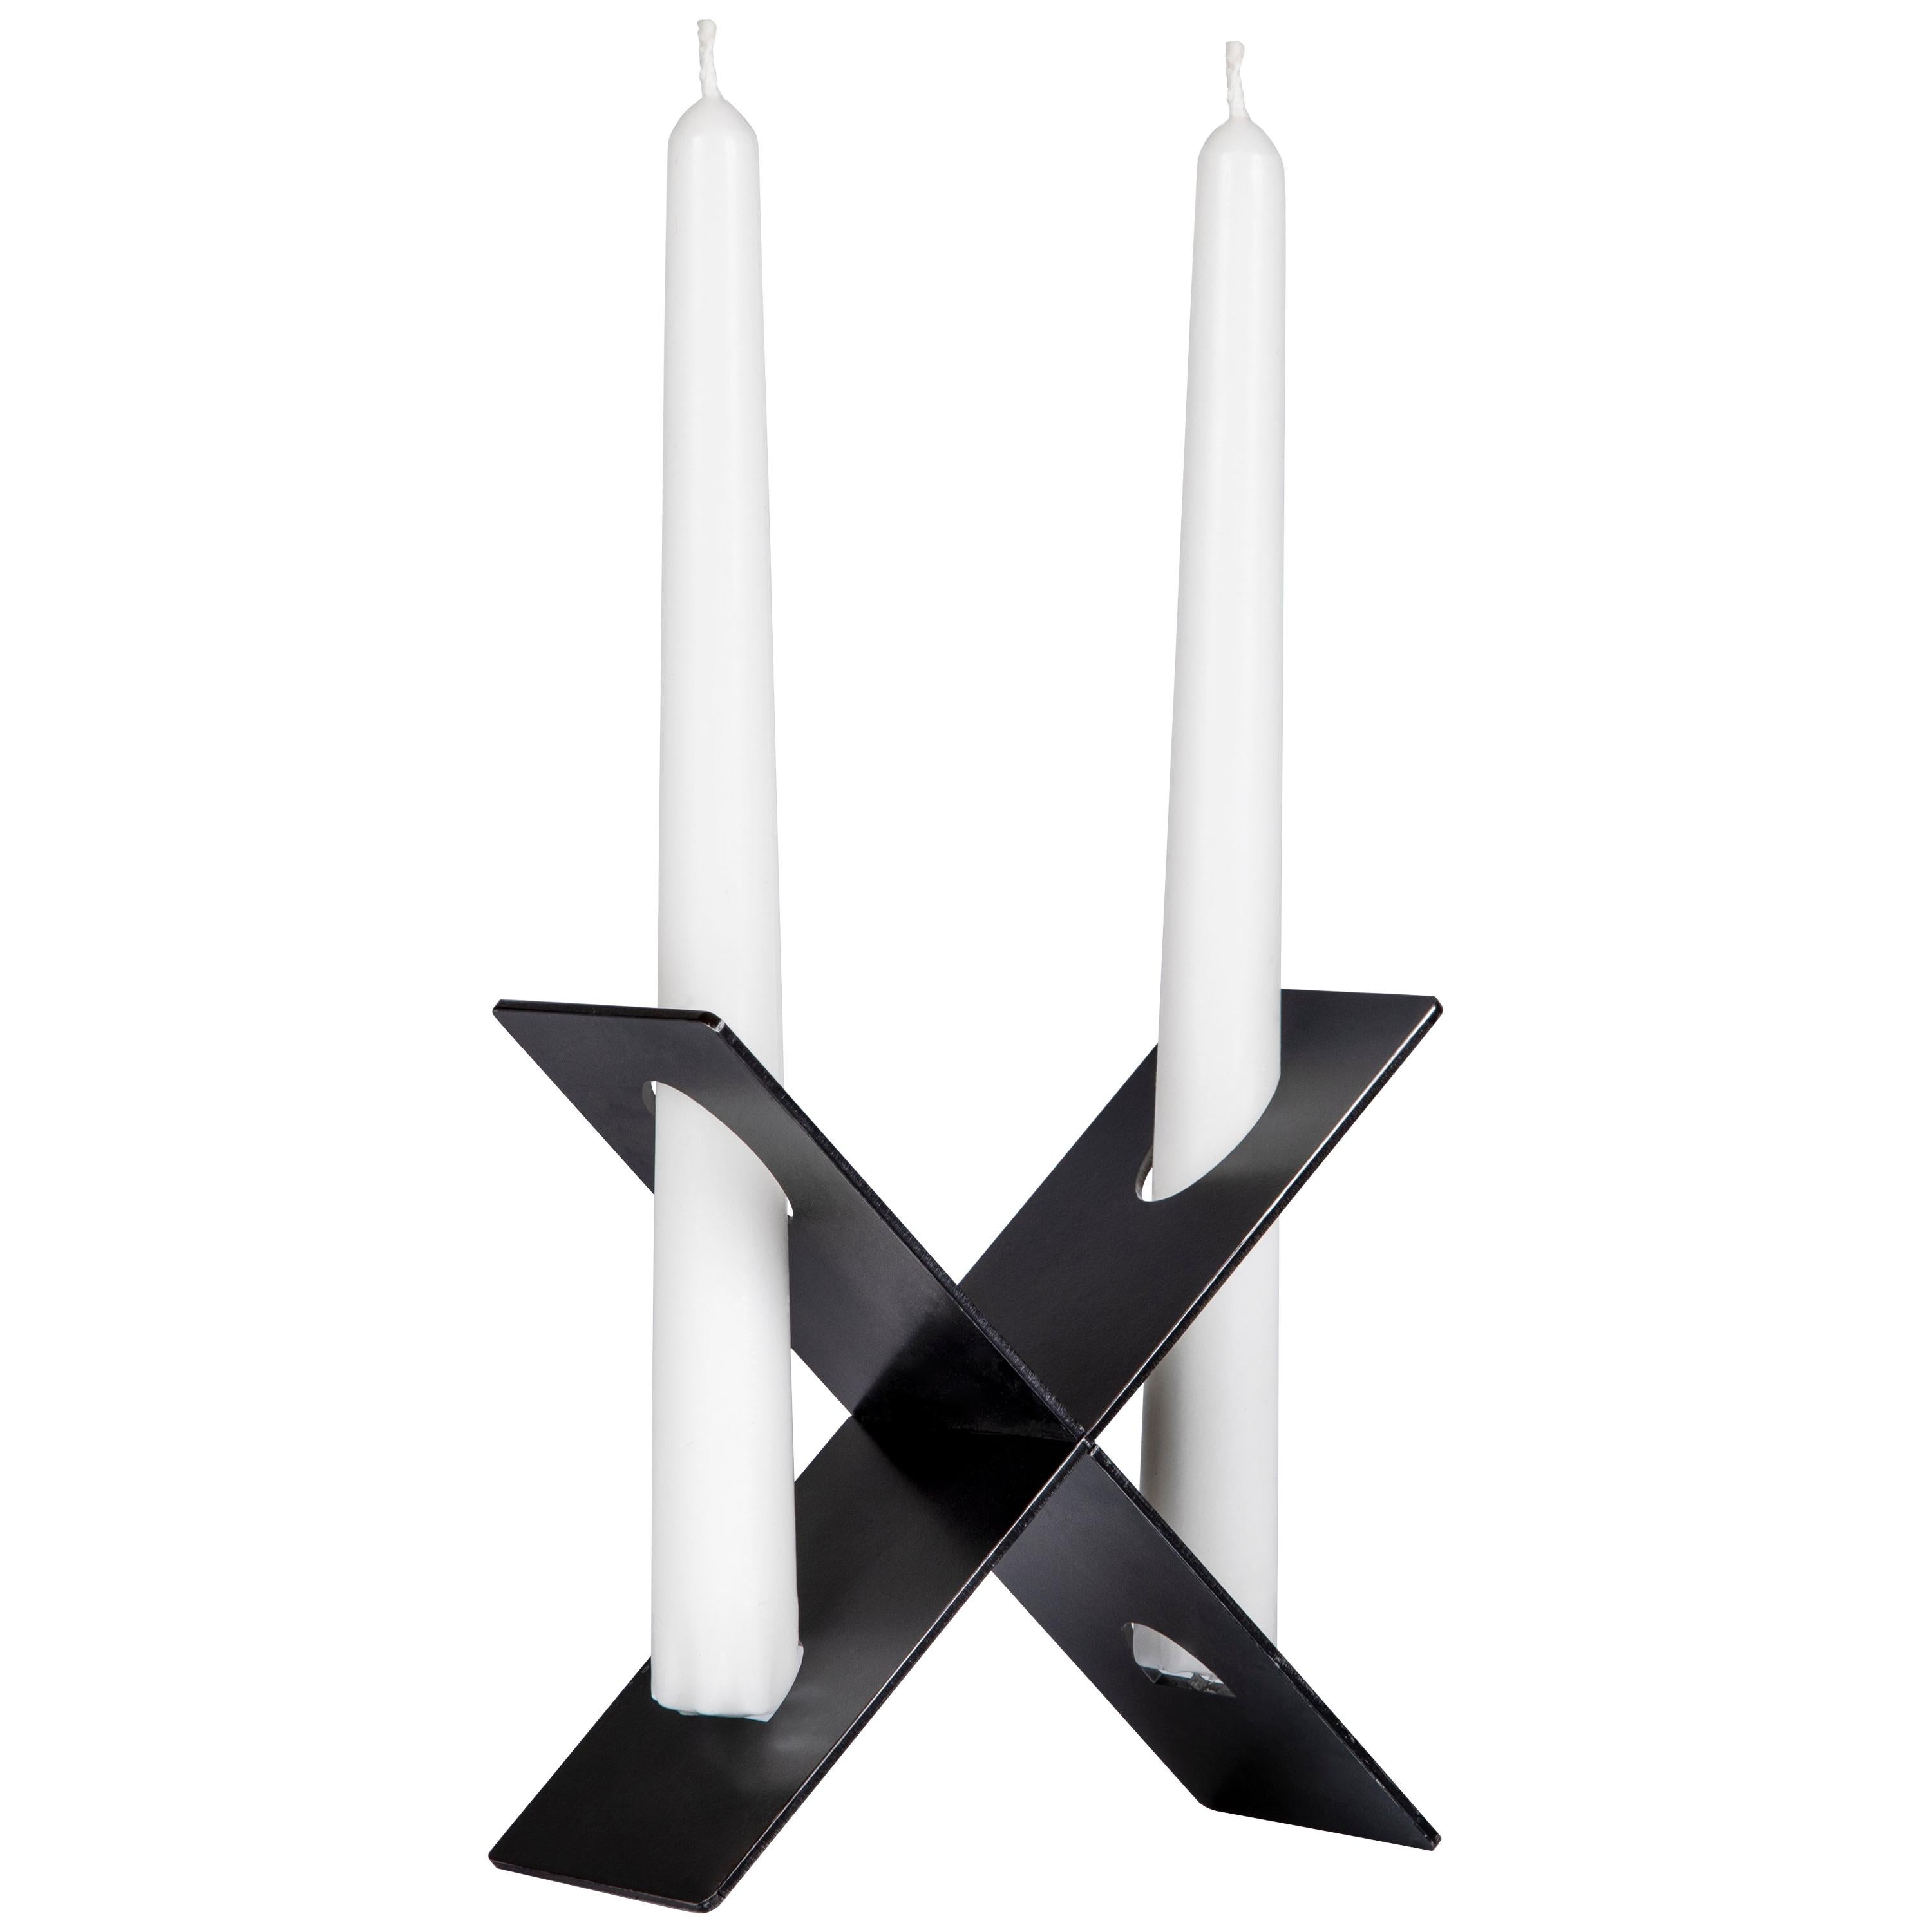 Luigi is a Removable Two-Arms Design Iron Candleholder For Sale